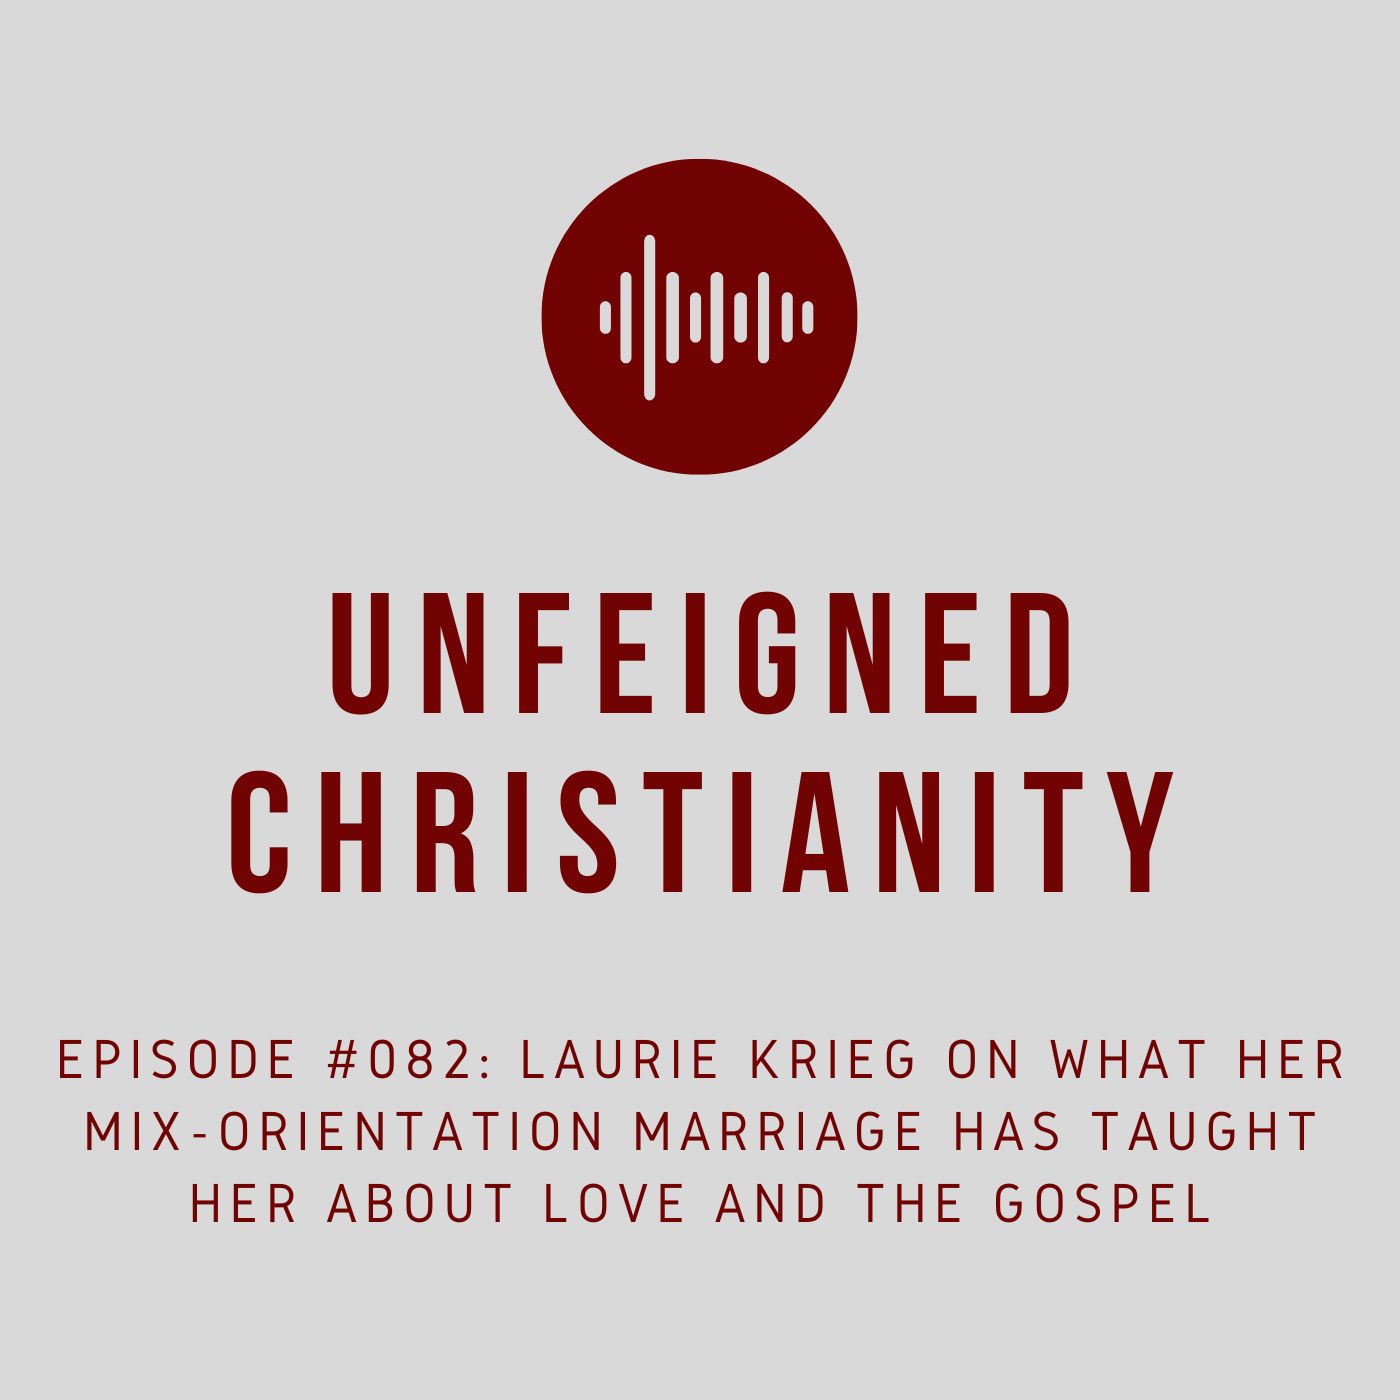 #082 - Laurie Krieg on What Her Mixed-Orientation Marriage Has Taught Her about Love and the Gospel